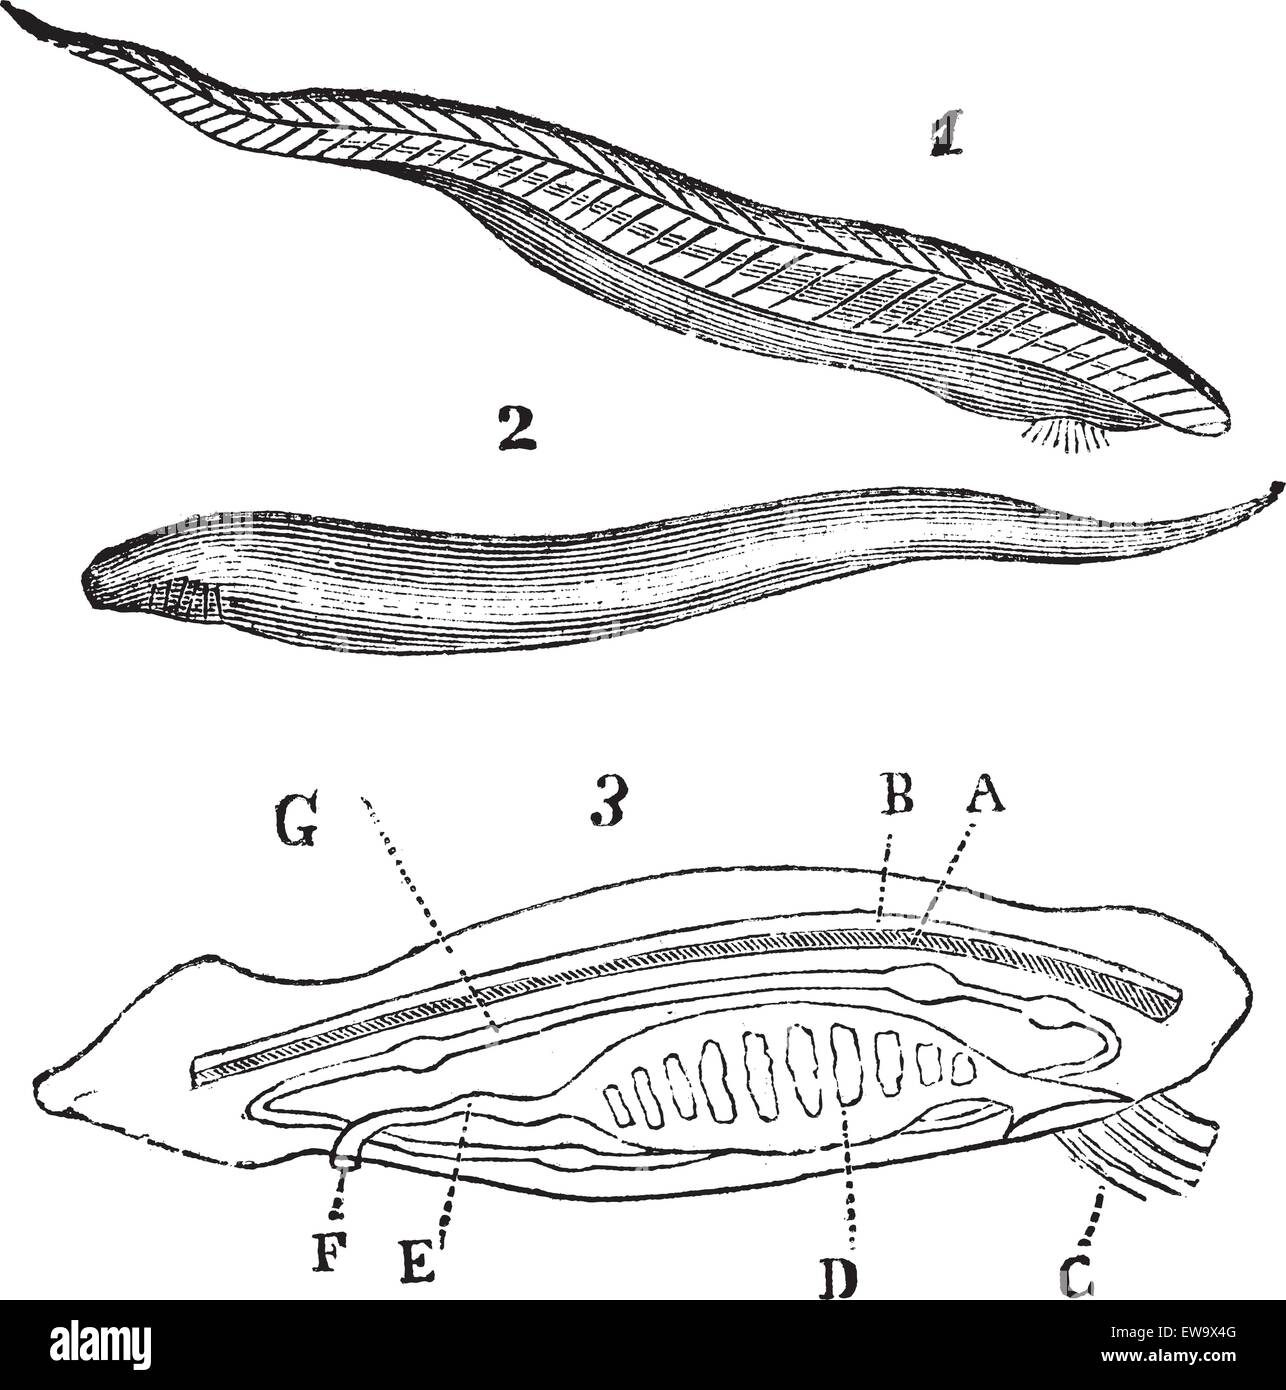 Lancelet ( amphioxus lanceolatus ) top, bottom and inside view vintage engraving. Information about vertabrate evolution. Vector illustration, isolated cut-out. Stock Vector